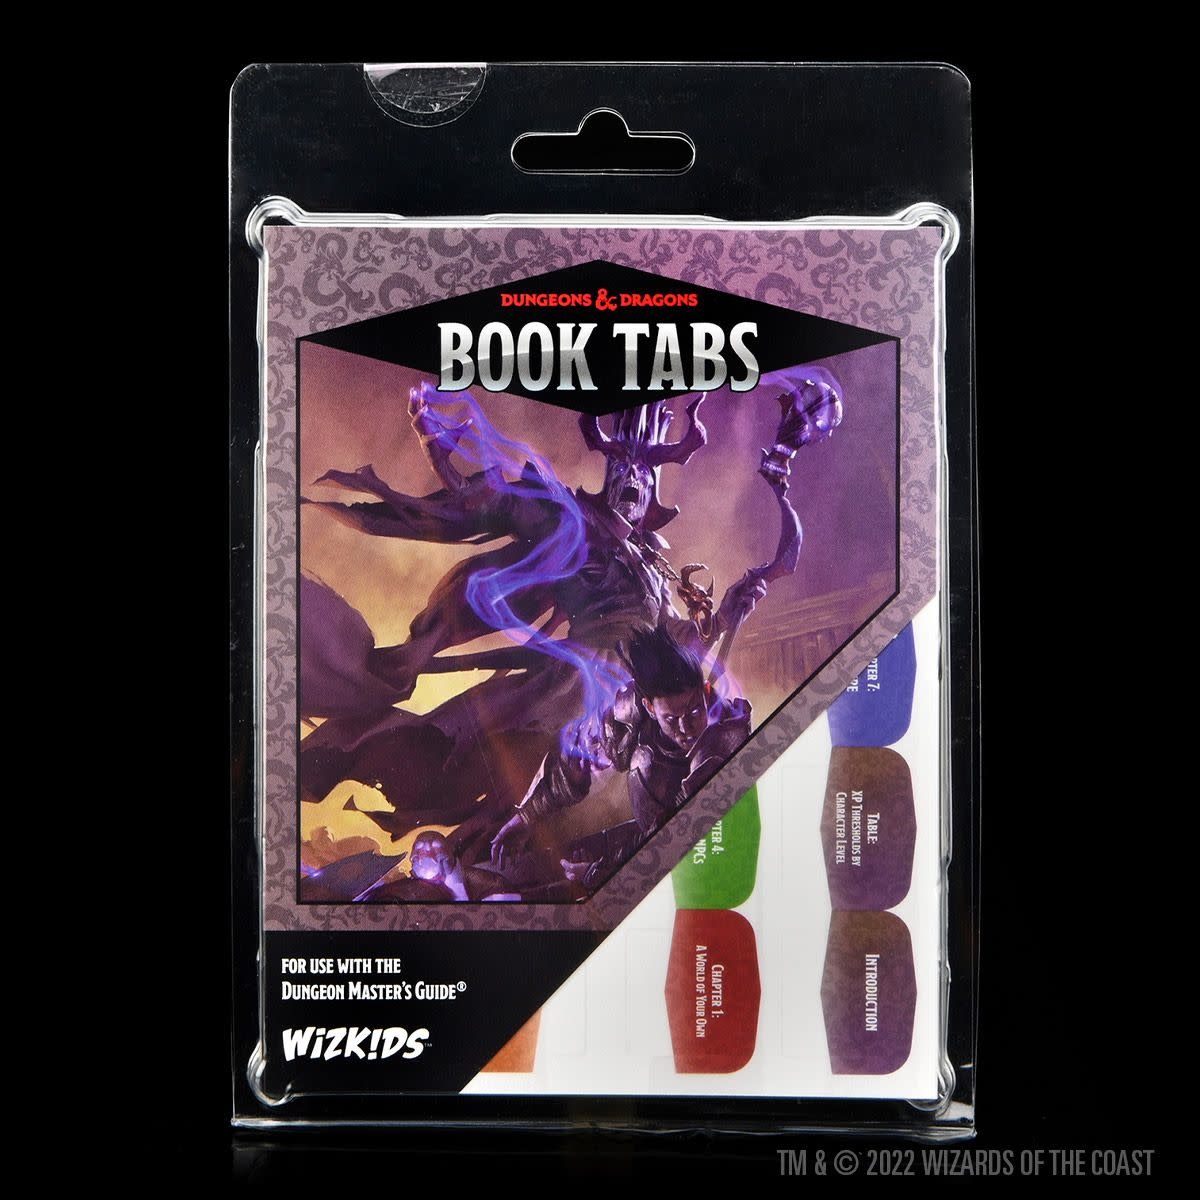 The Dungeon Master Ch 1 WizKids/NECA D&D Dungeon Master Guide Book Tabs - Meeples Games